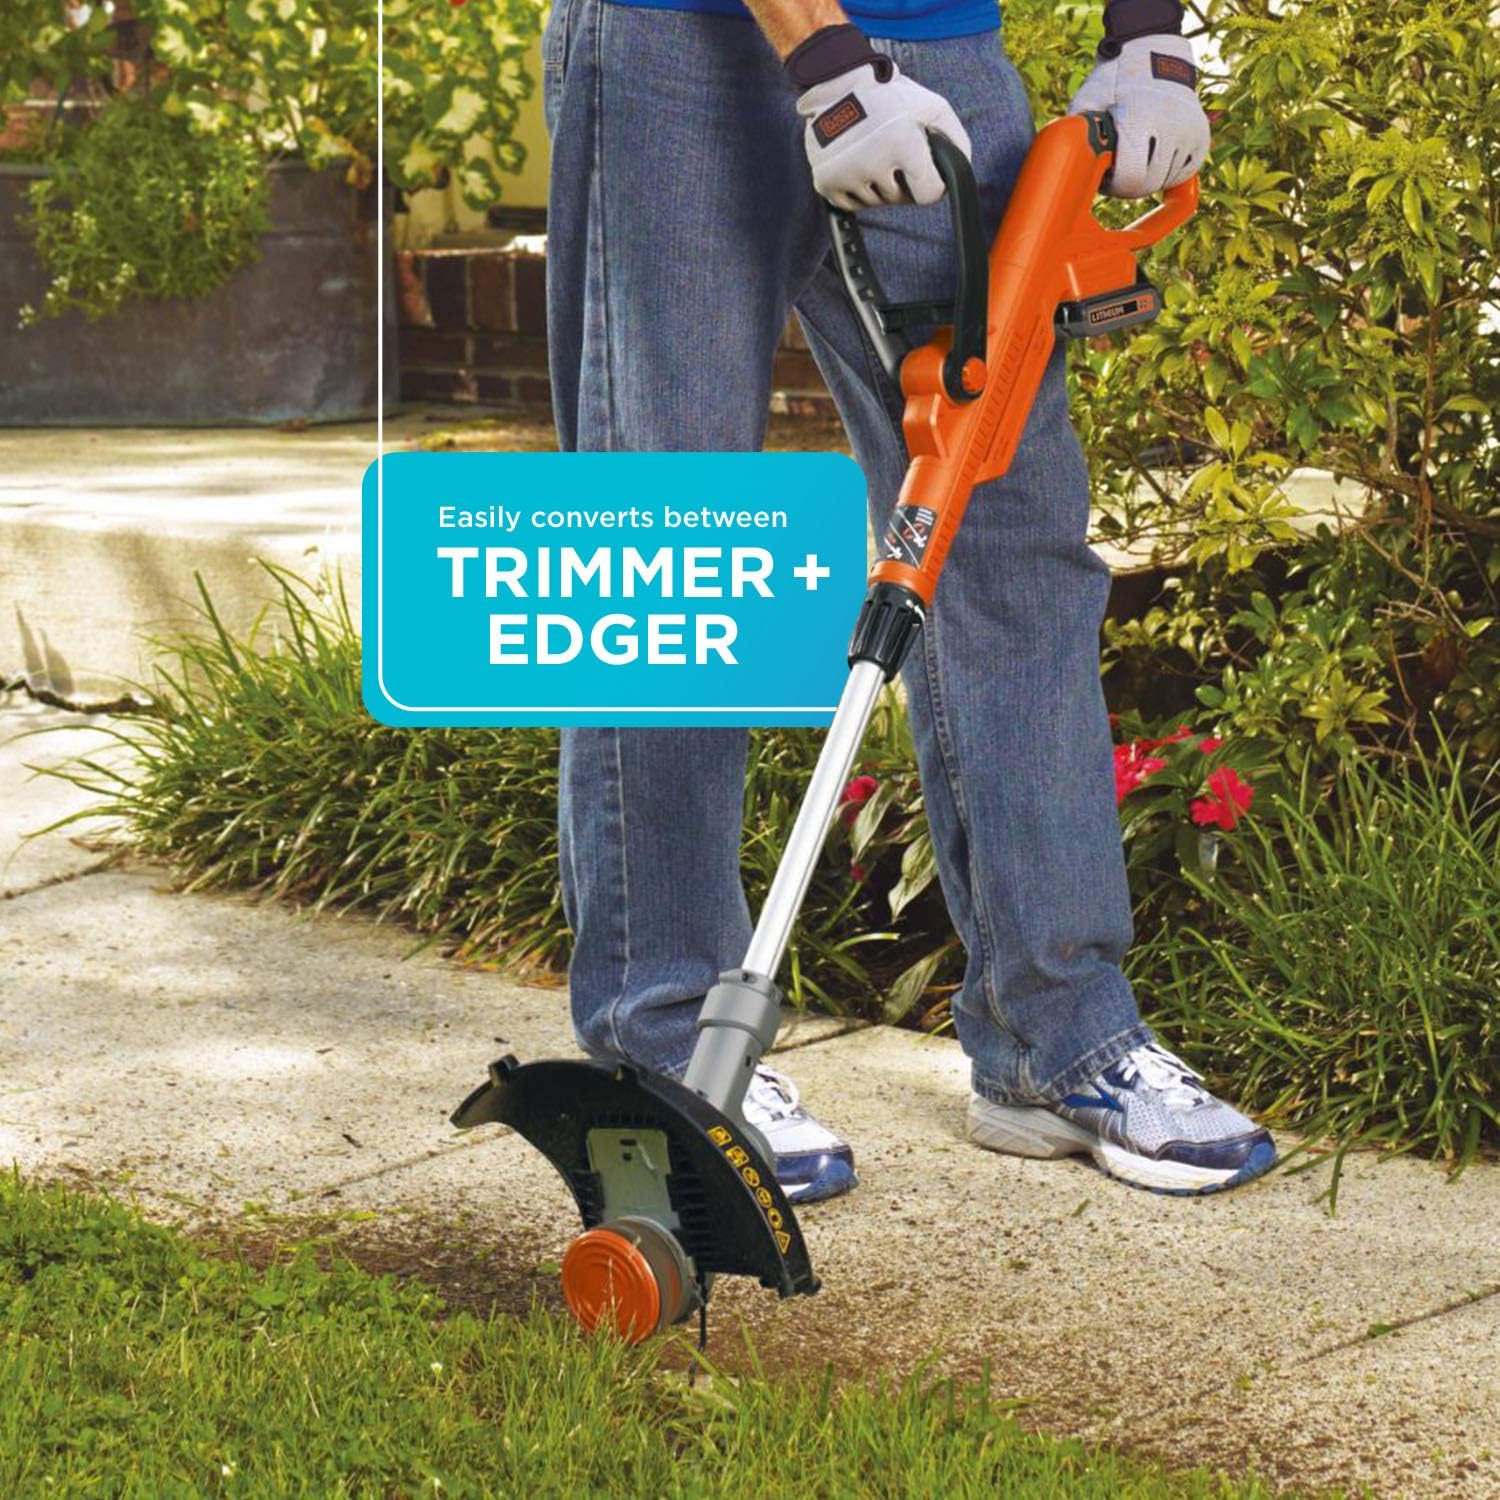 https://discounttoday.net/wp-content/uploads/2023/09/BLACKDECKER-20V-MAX-Cordless-String-Trimmer-2-in-1-Trimmer-and-Edger-12-Inch-Battery-Included-LST300-3.jpg